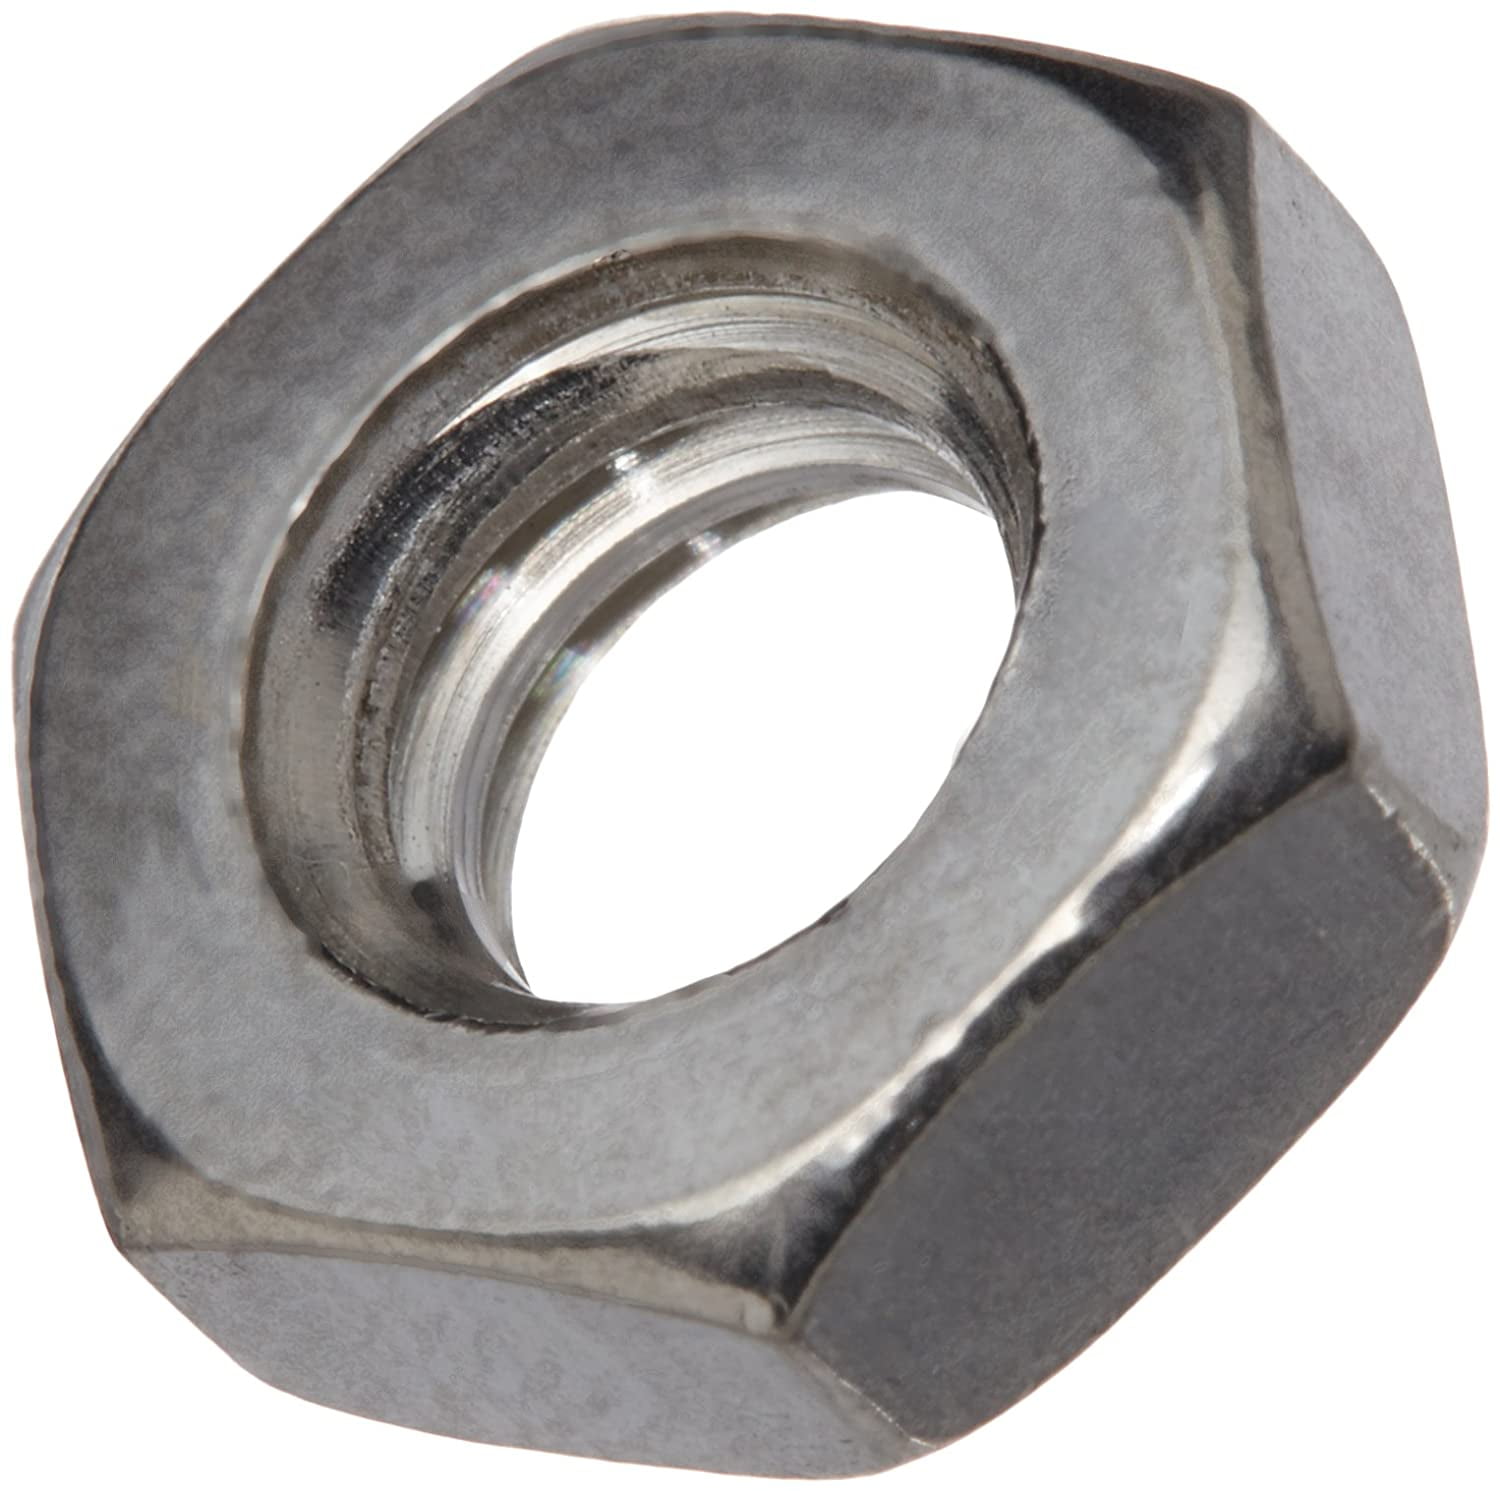 50 Pc 1 1/8-7 Slotted Hex Nuts/Steel/Zinc Carton 